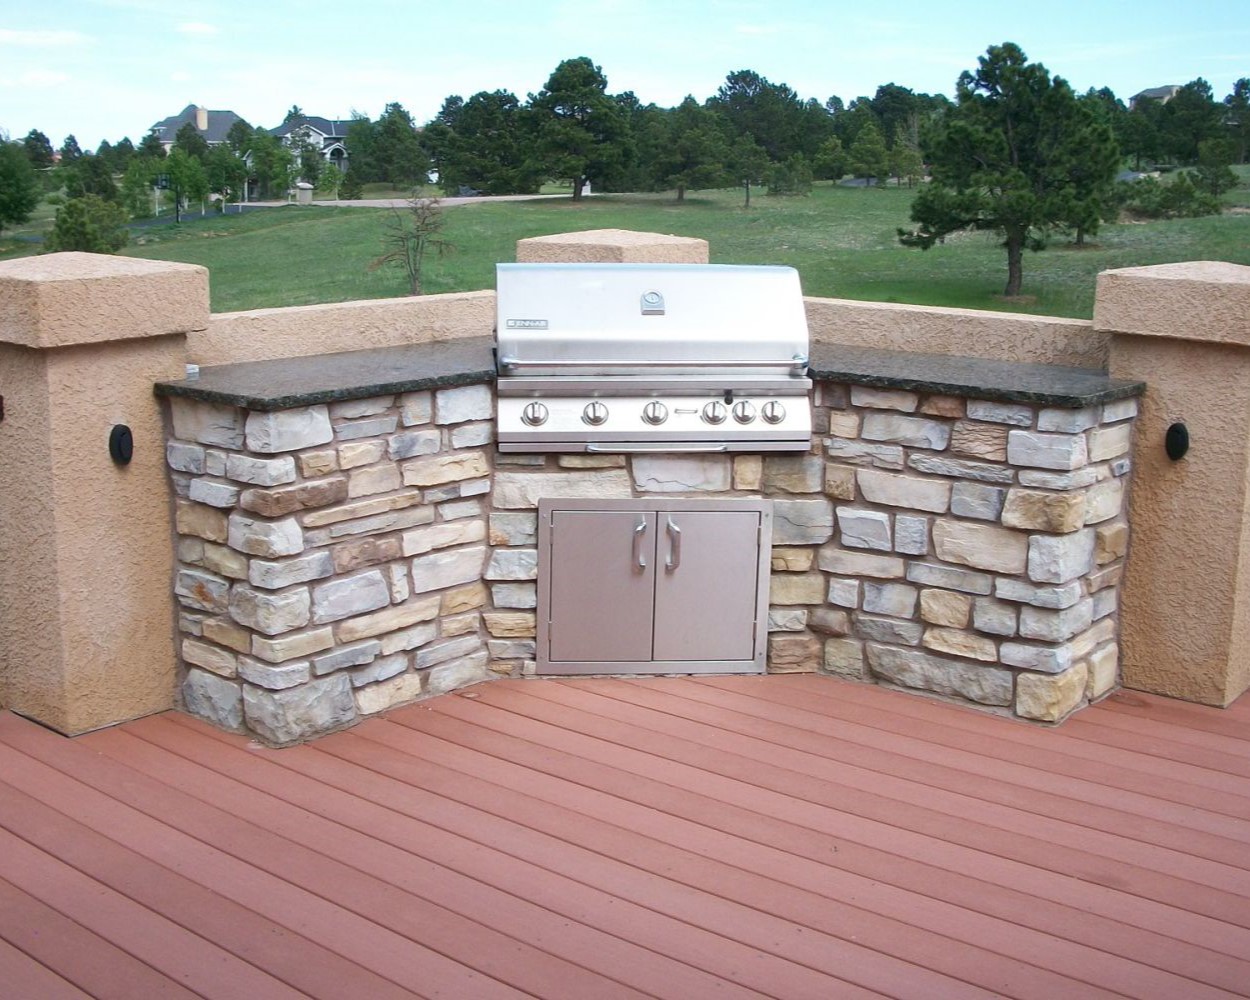 A redwood deck that features a corner with stucco columns and a built-in grill area. The grill area has a rock base and granite countertops